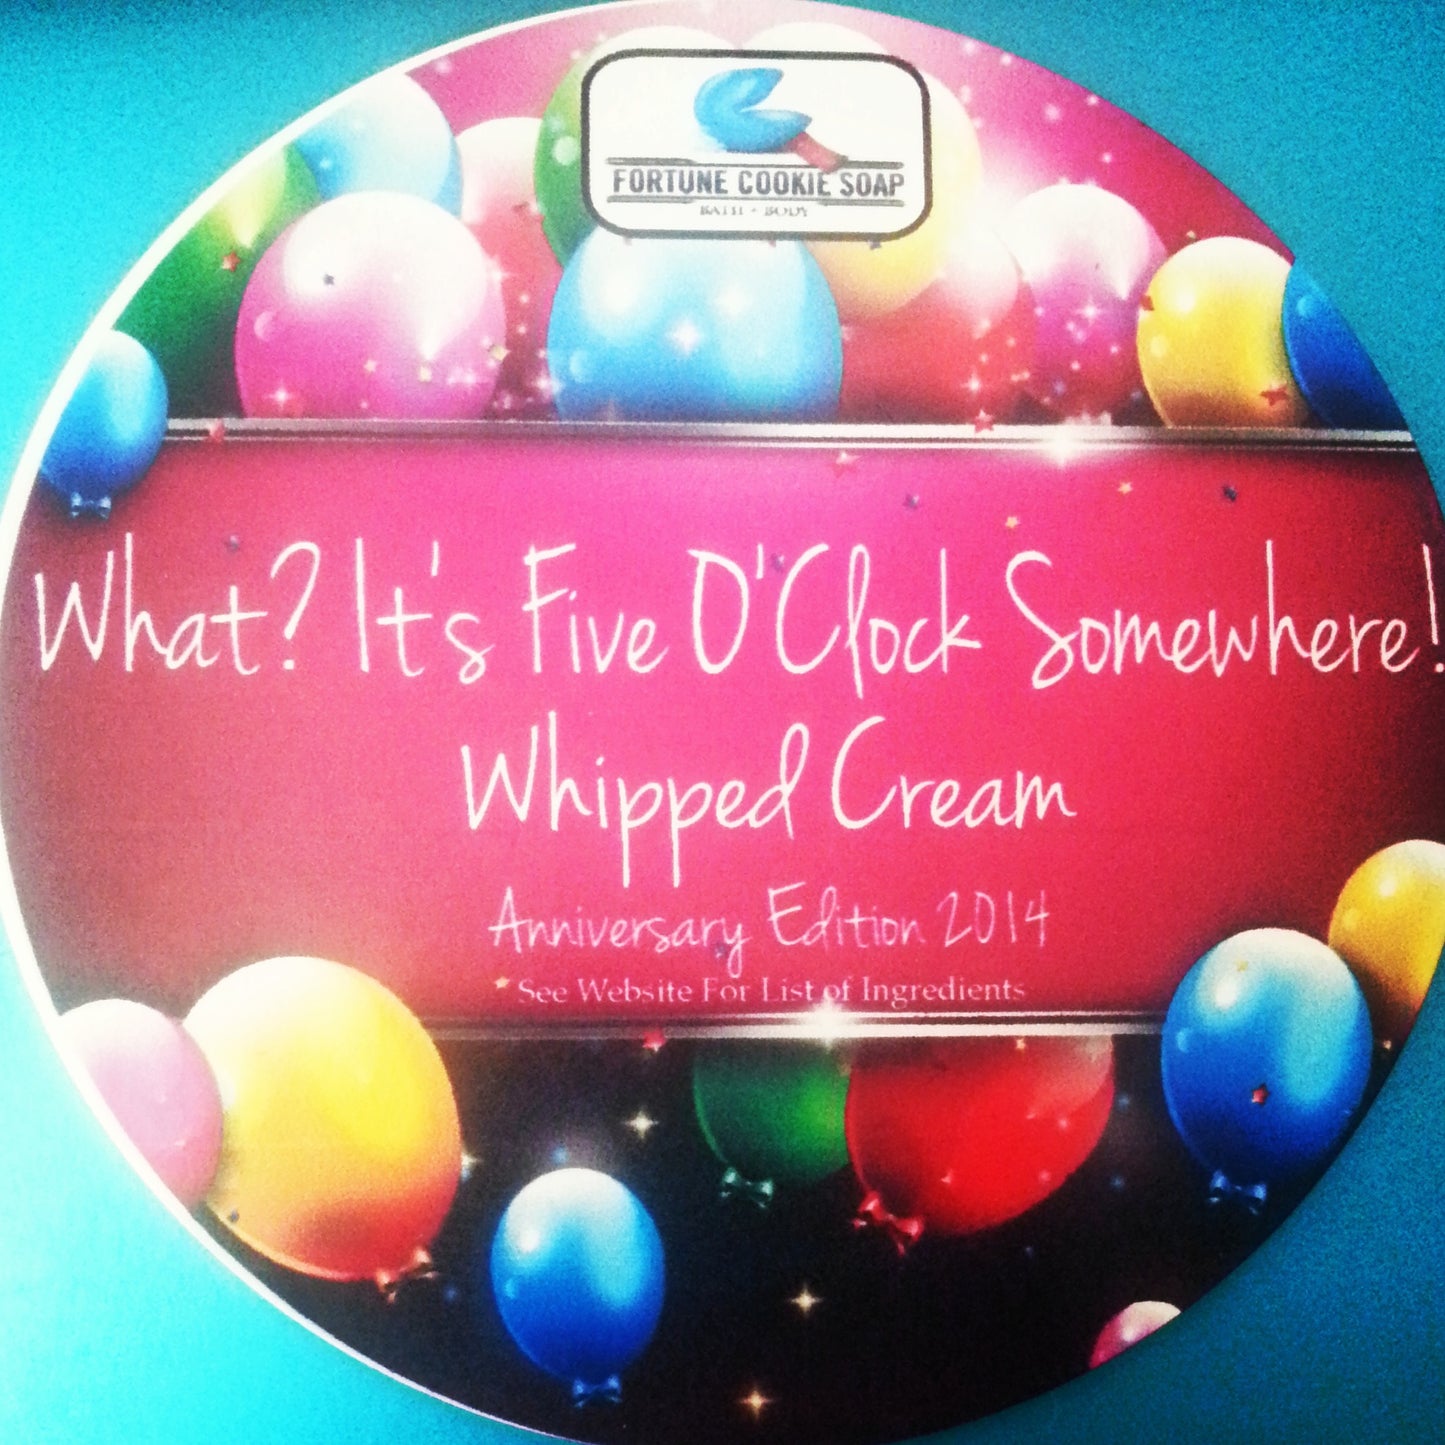 What? It's Five O'Clock Somewhere! Anniversary Edition Whipped Cream - Fortune Cookie Soap